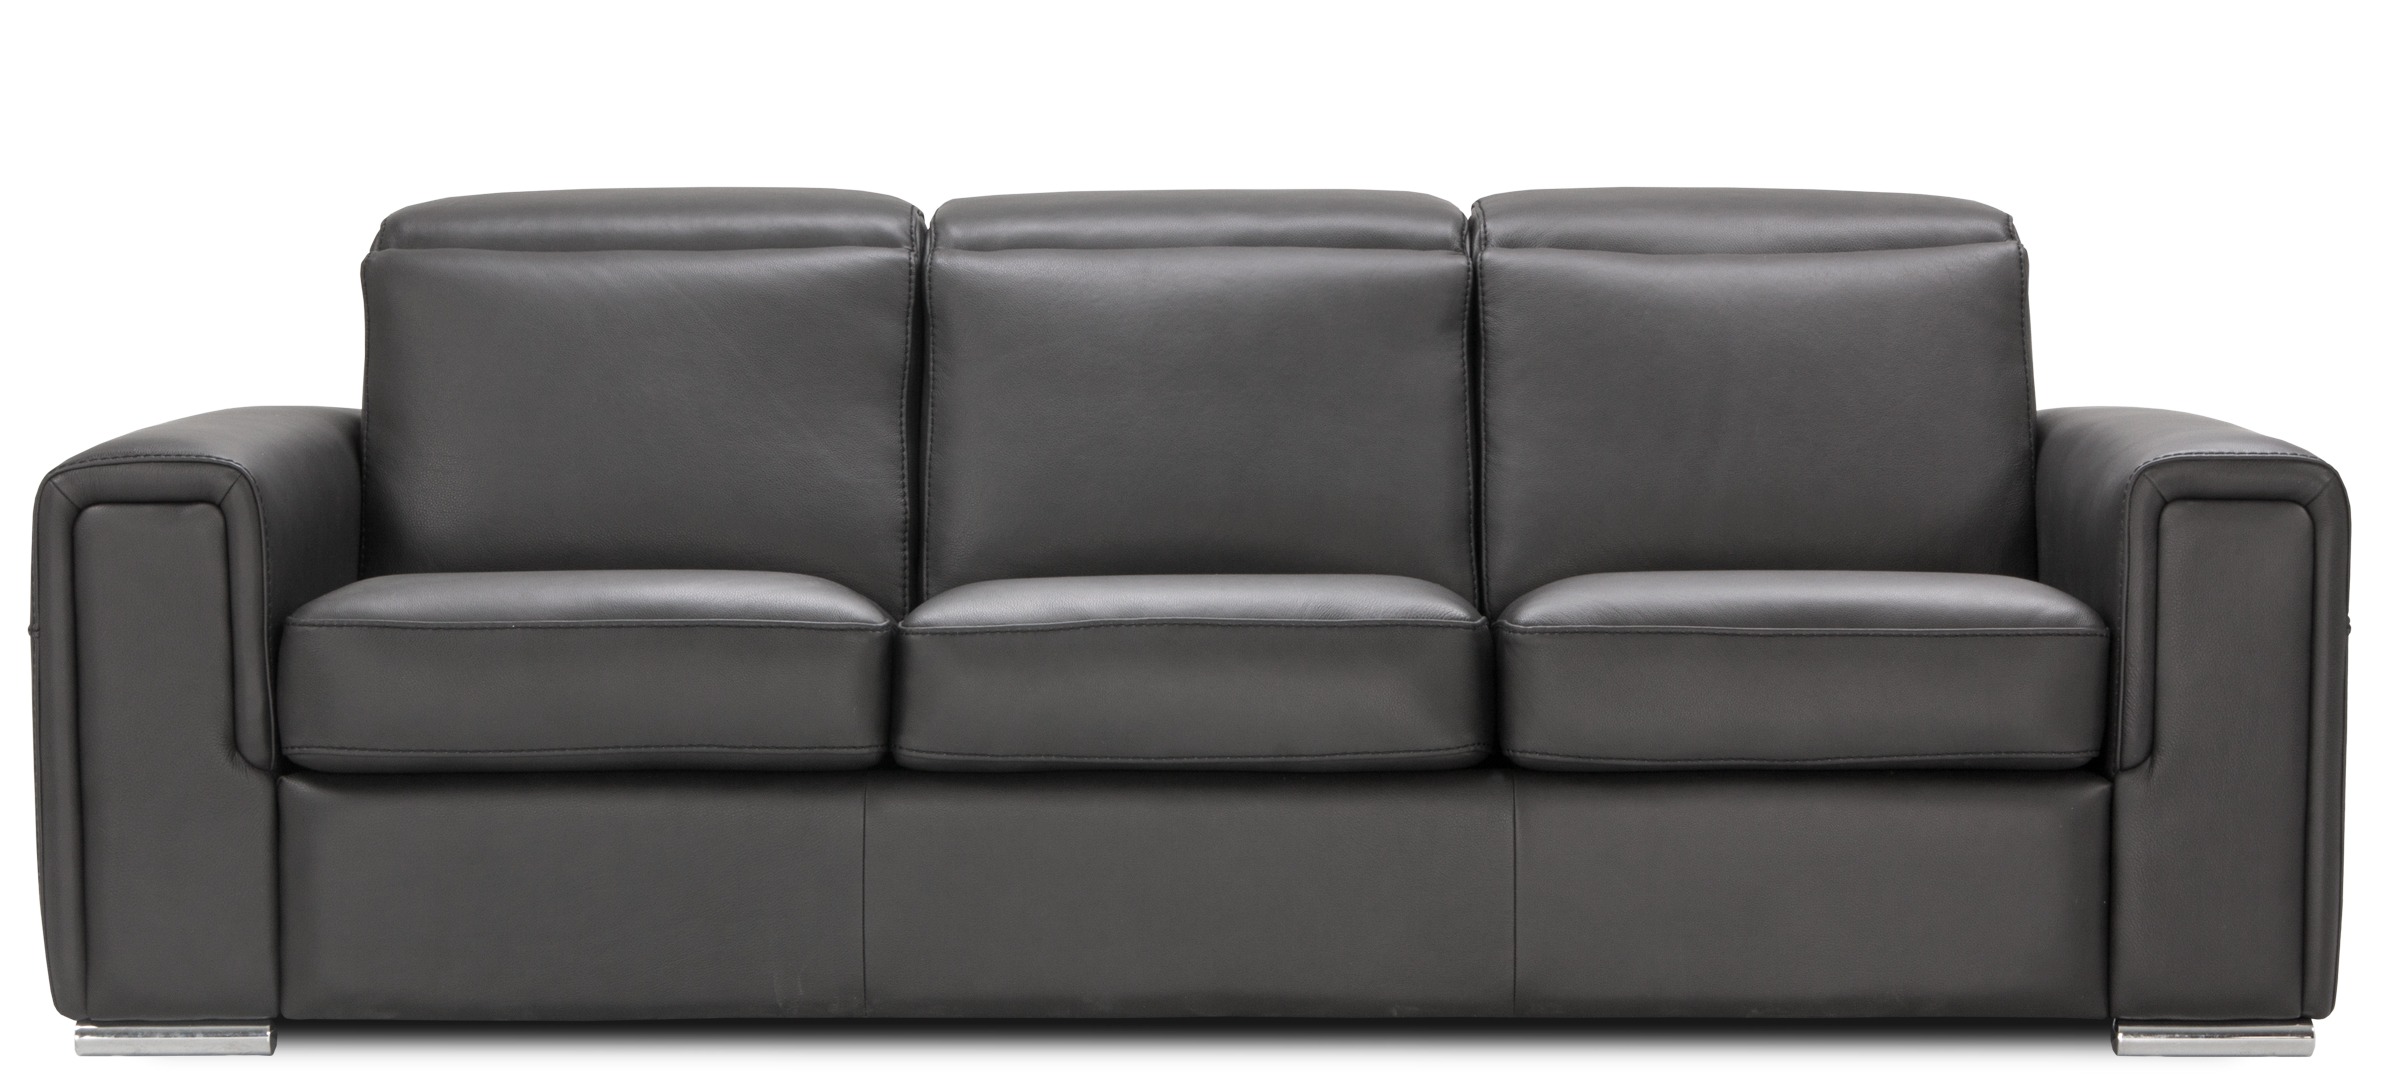 Cologne_sofa_cassiopee_charcoal_front